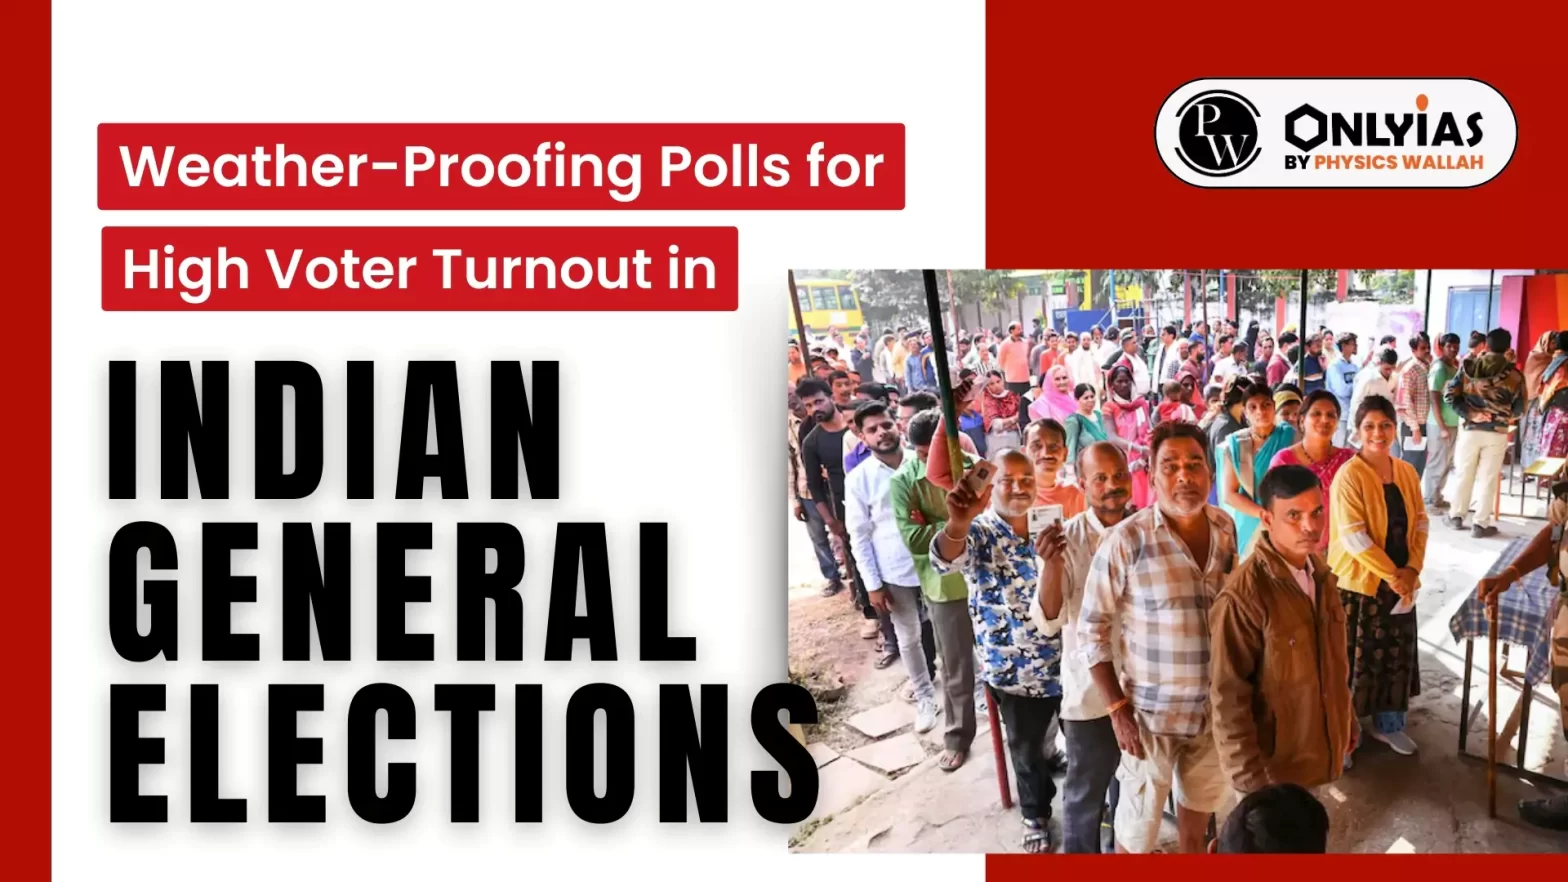 Weather-Proofing Polls for High Voter Turnout in Indian General Elections